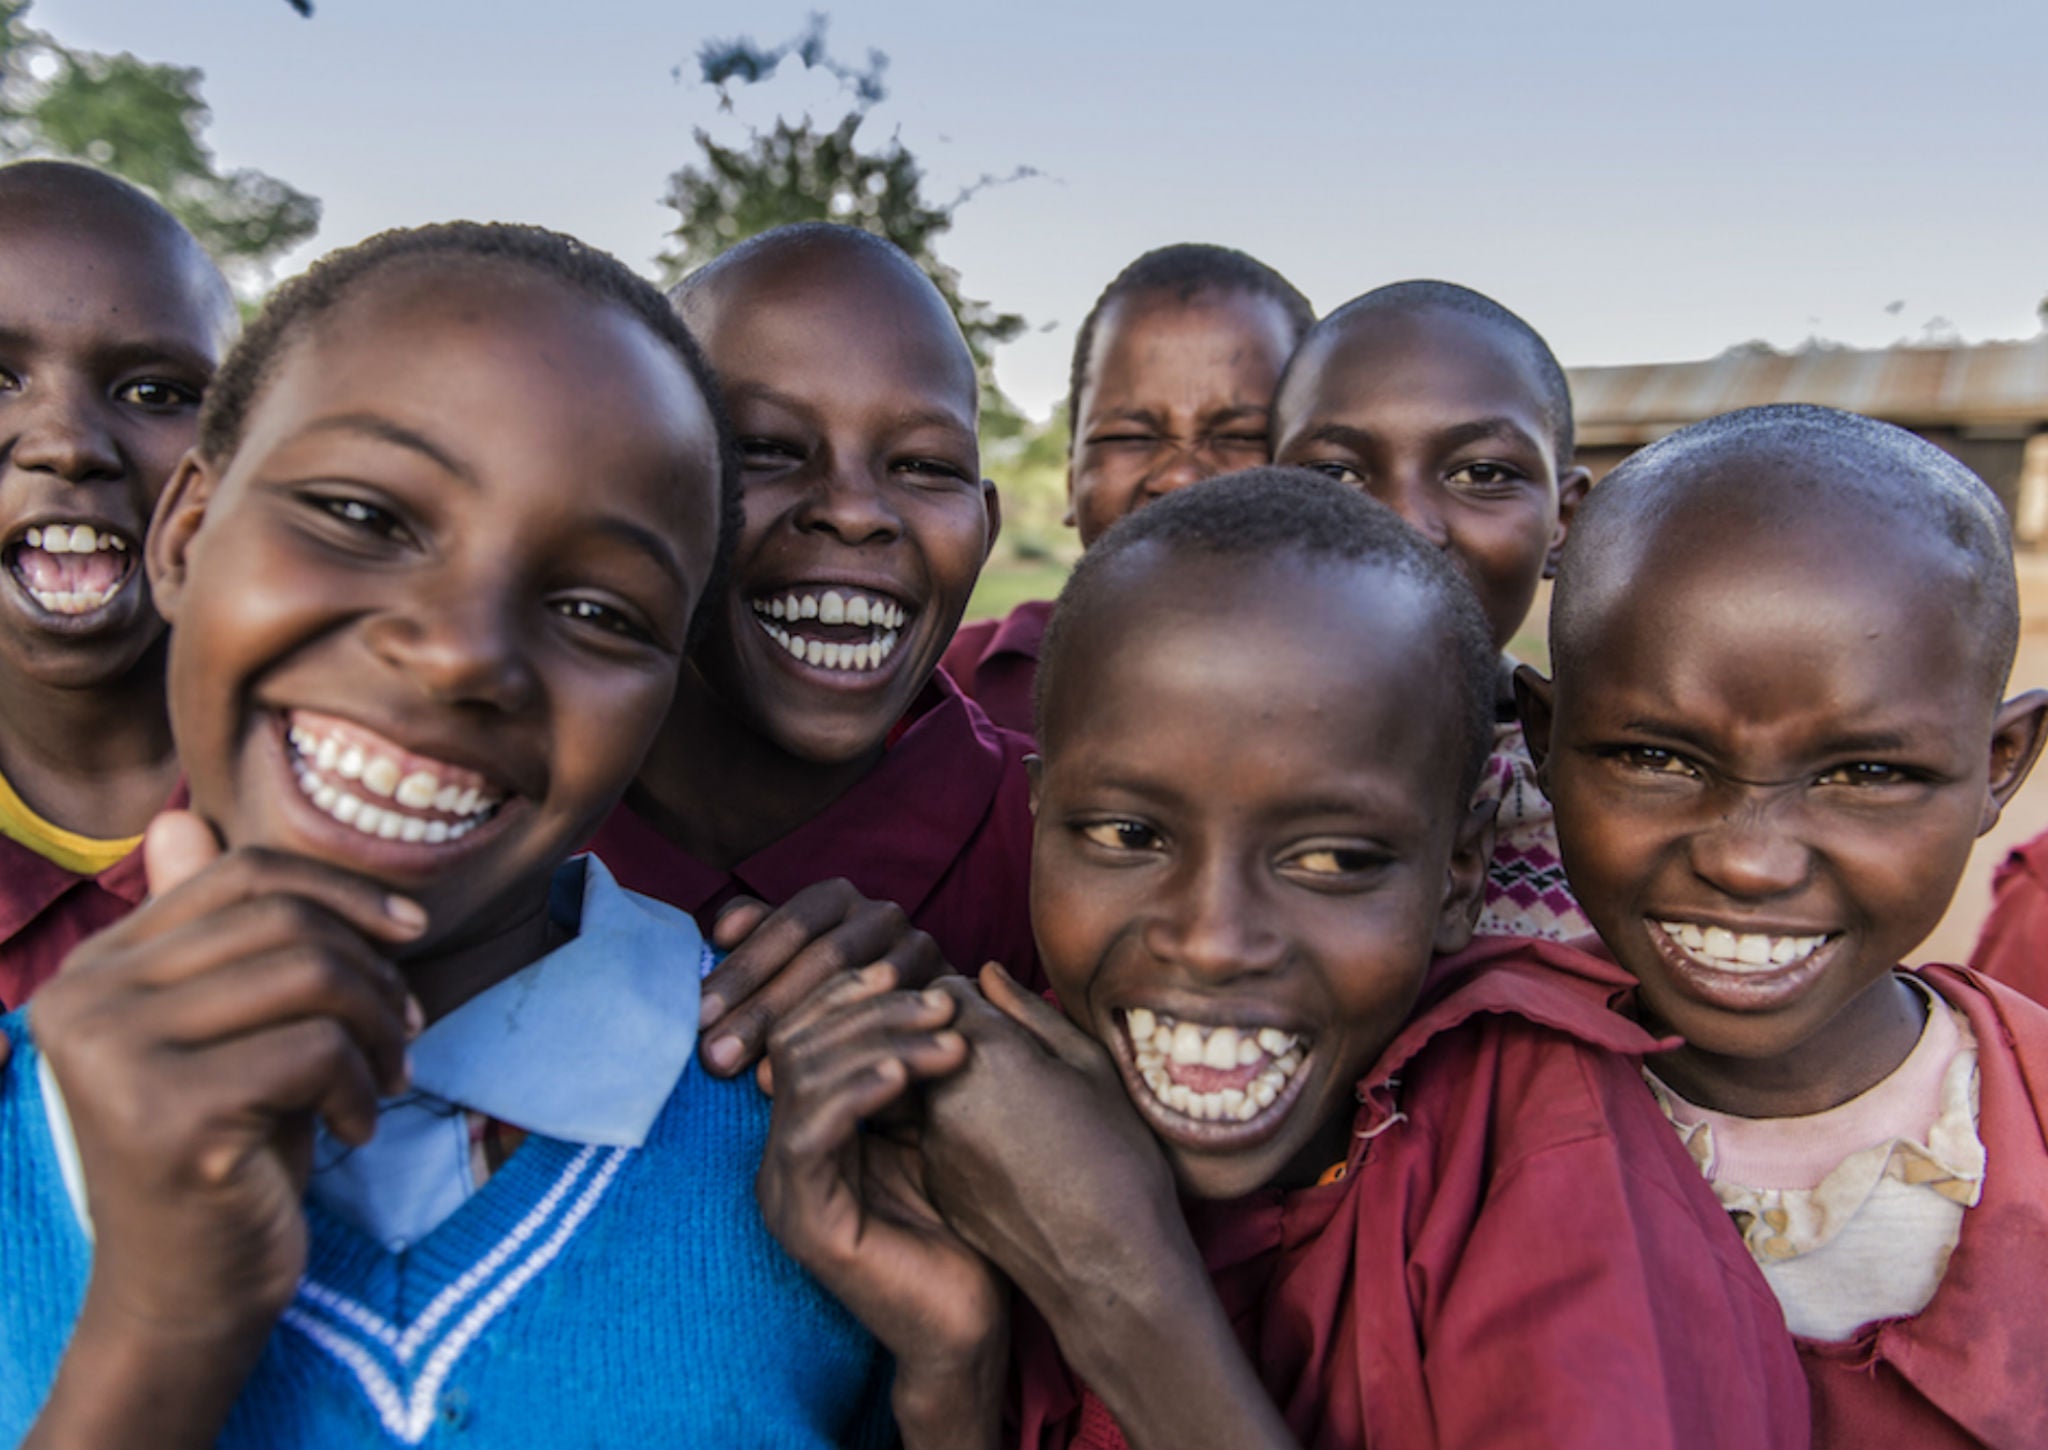 Kenyan children smile for a photo at Ewaso Primary School, that benefits from the conservancy (Ami Vitale for The Nature Conservancy)